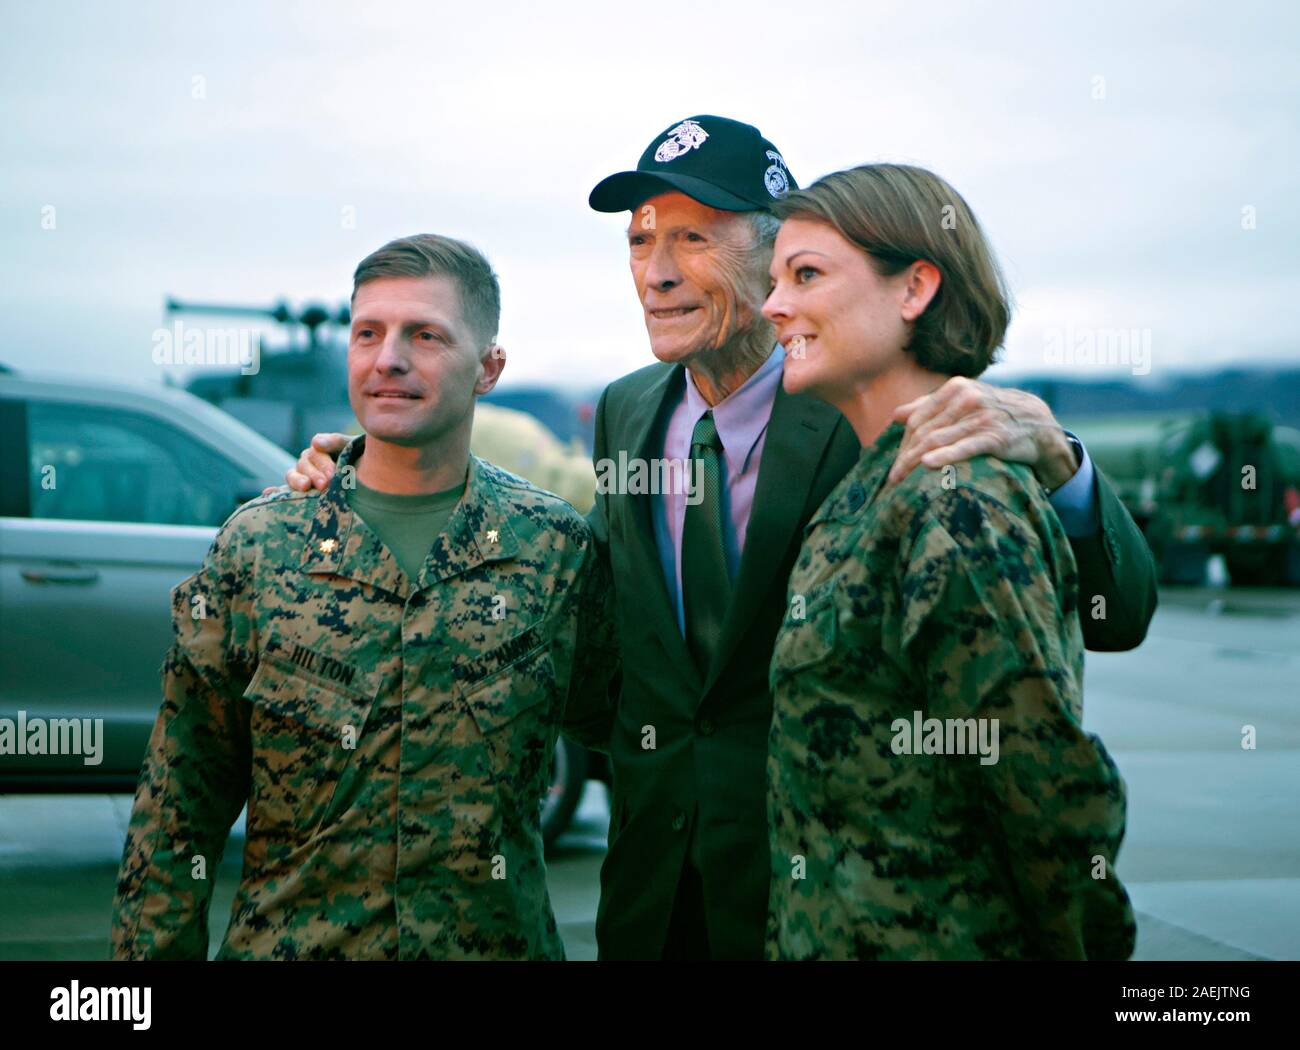 Actor and Director Clint Eastwood, center, poses with U.S. Marine Corps Maj. Matthew Hilton, left, and Master Sgt. Kristin Bagley, following an advanced showing of Eastwoods latest movie at Marine Corps Air Station Camp Pendleton December 7, 2019 in Oceanside, California. Stock Photo